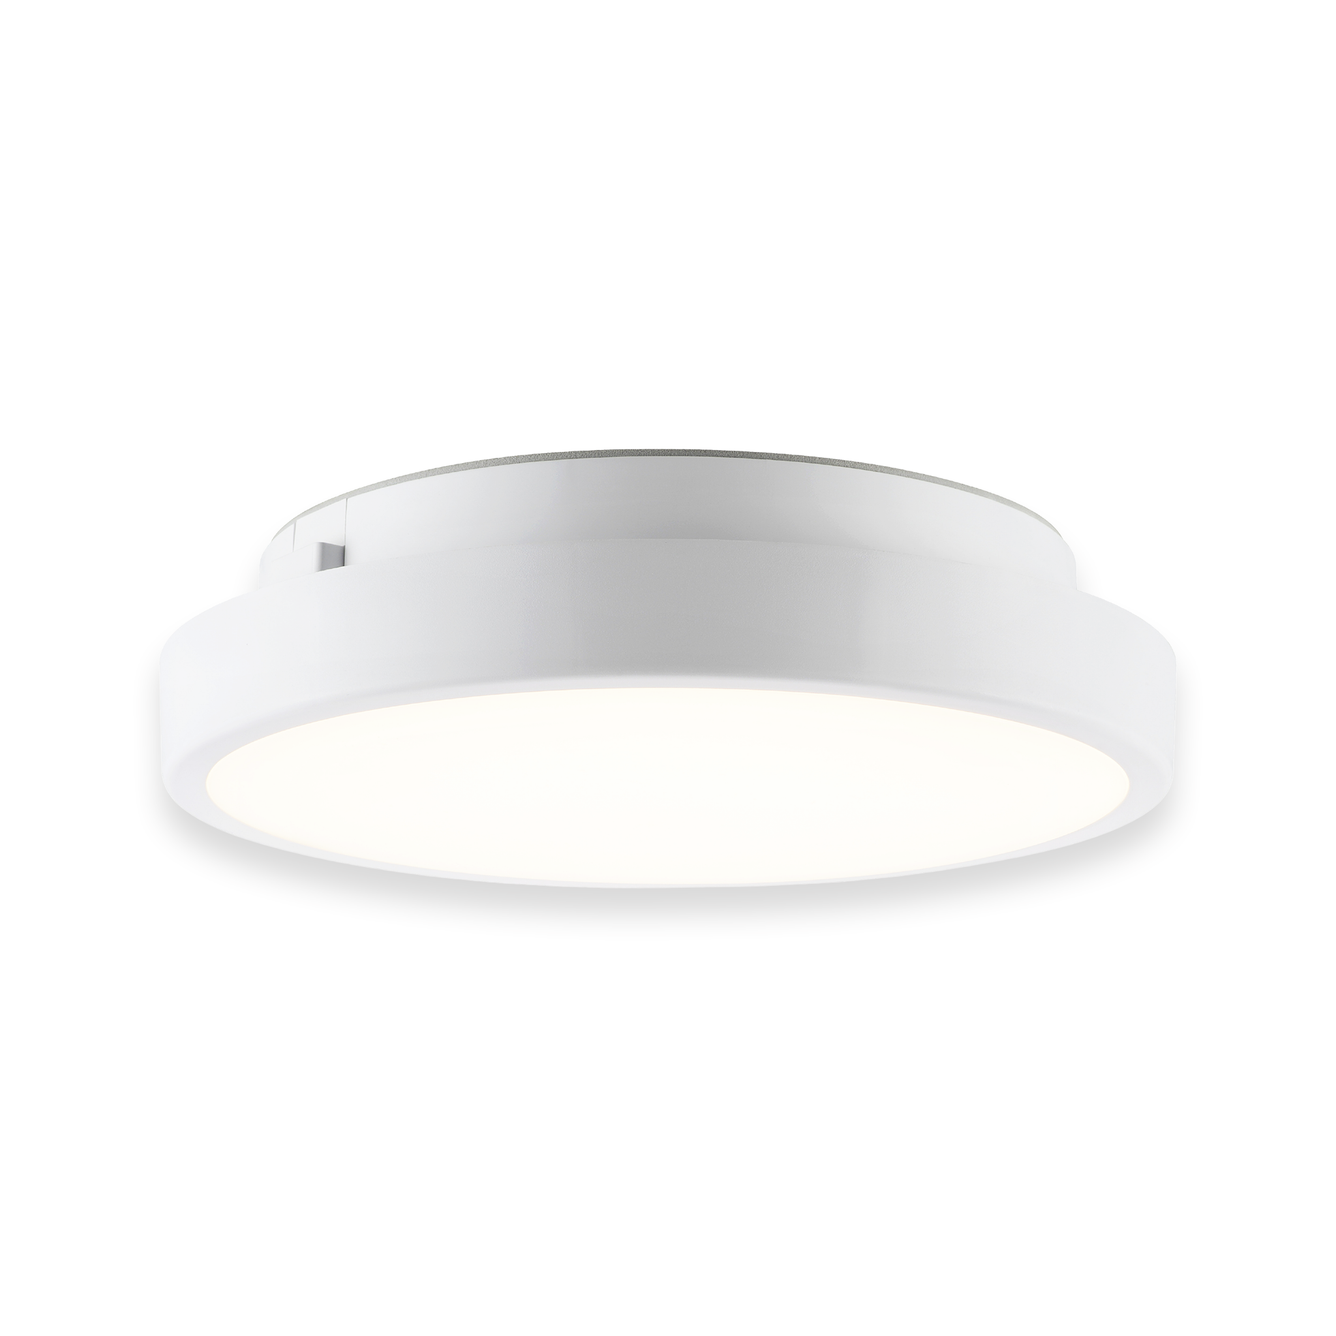 IP54 rated ceiling light, it can be used in wet areas like the bathroom or laundry or in outside areas like foyers, balconies or verandas